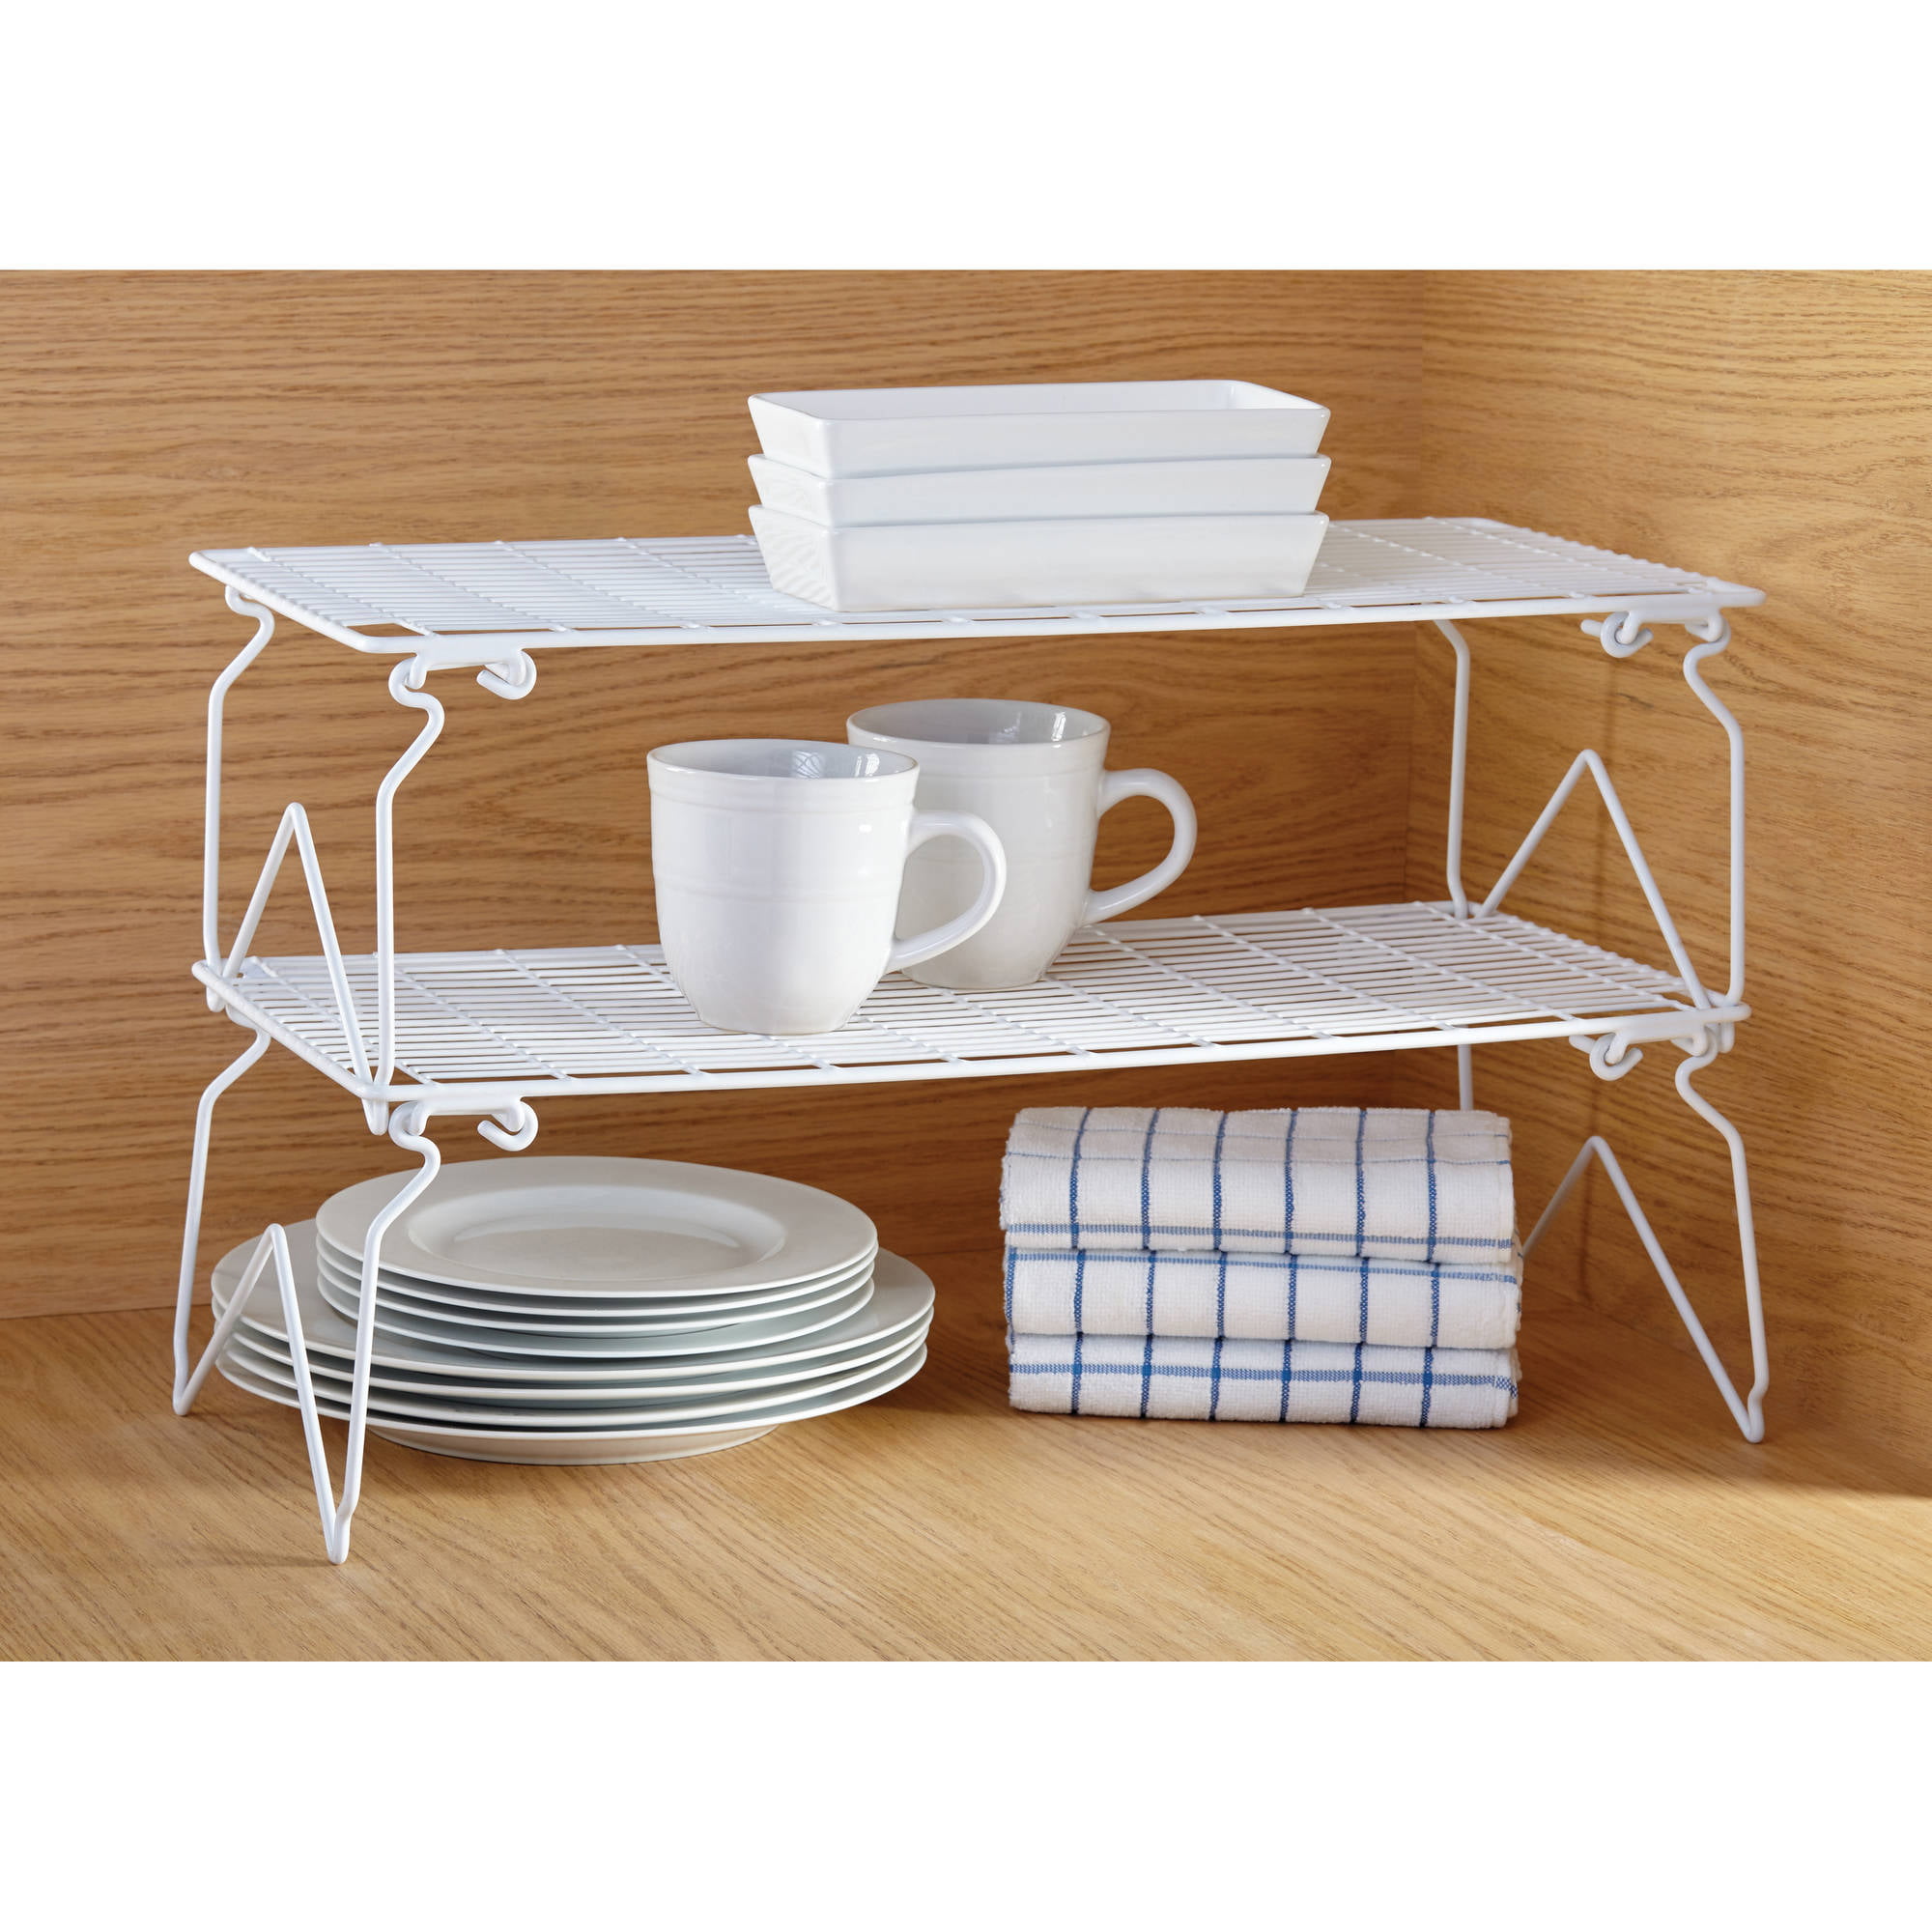 image: Mainstays Long Stacking Wire Shelf, White